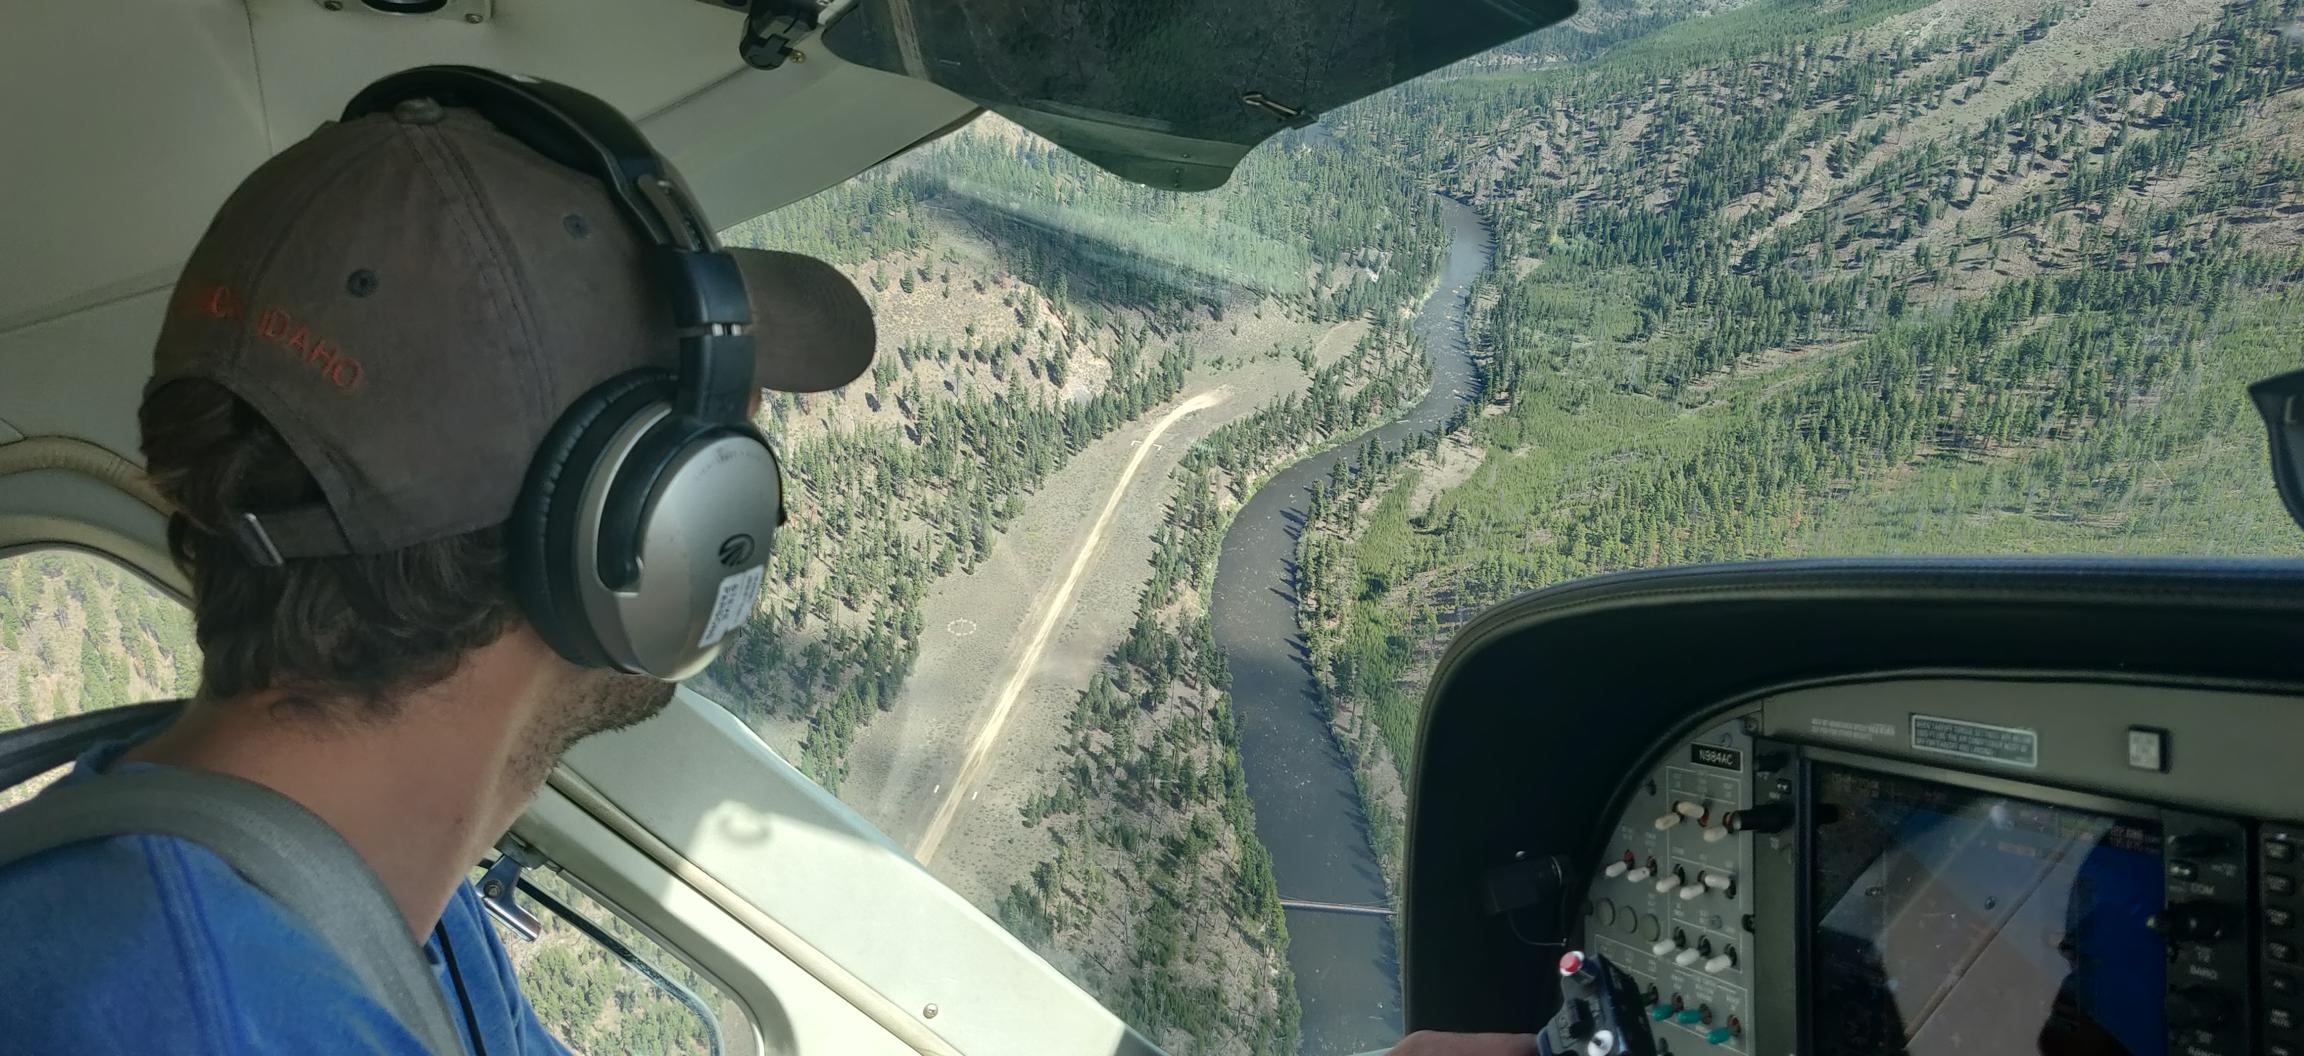 On final approach to the Indian Creek landing strip